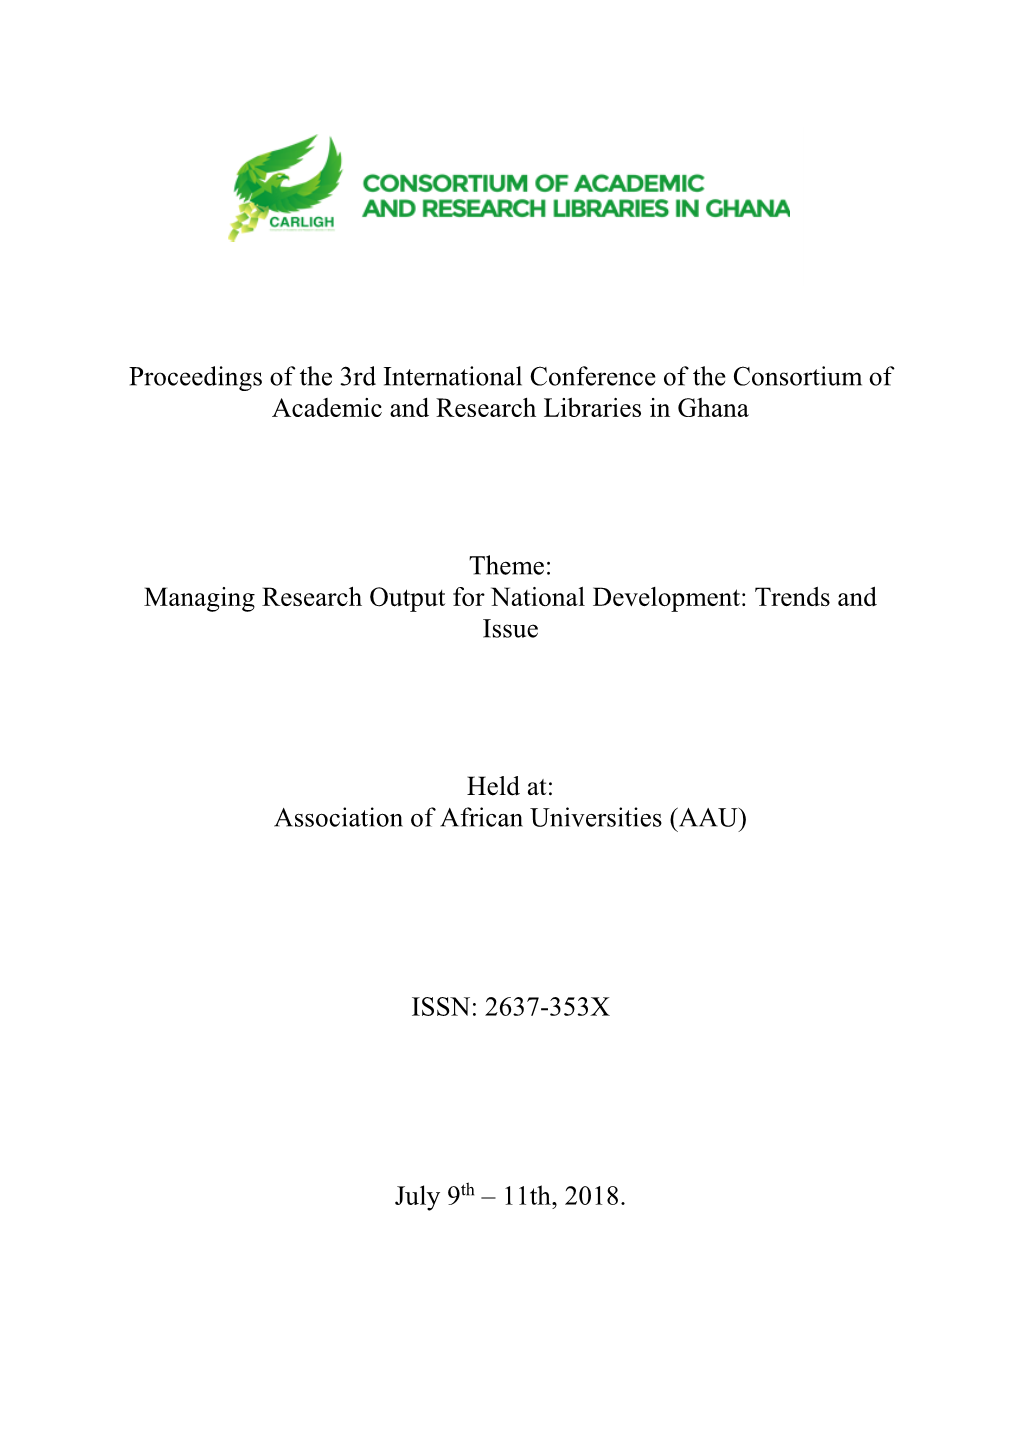 Proceedings of the 3Rd International Conference of the Consortium of Academic and Research Libraries in Ghana